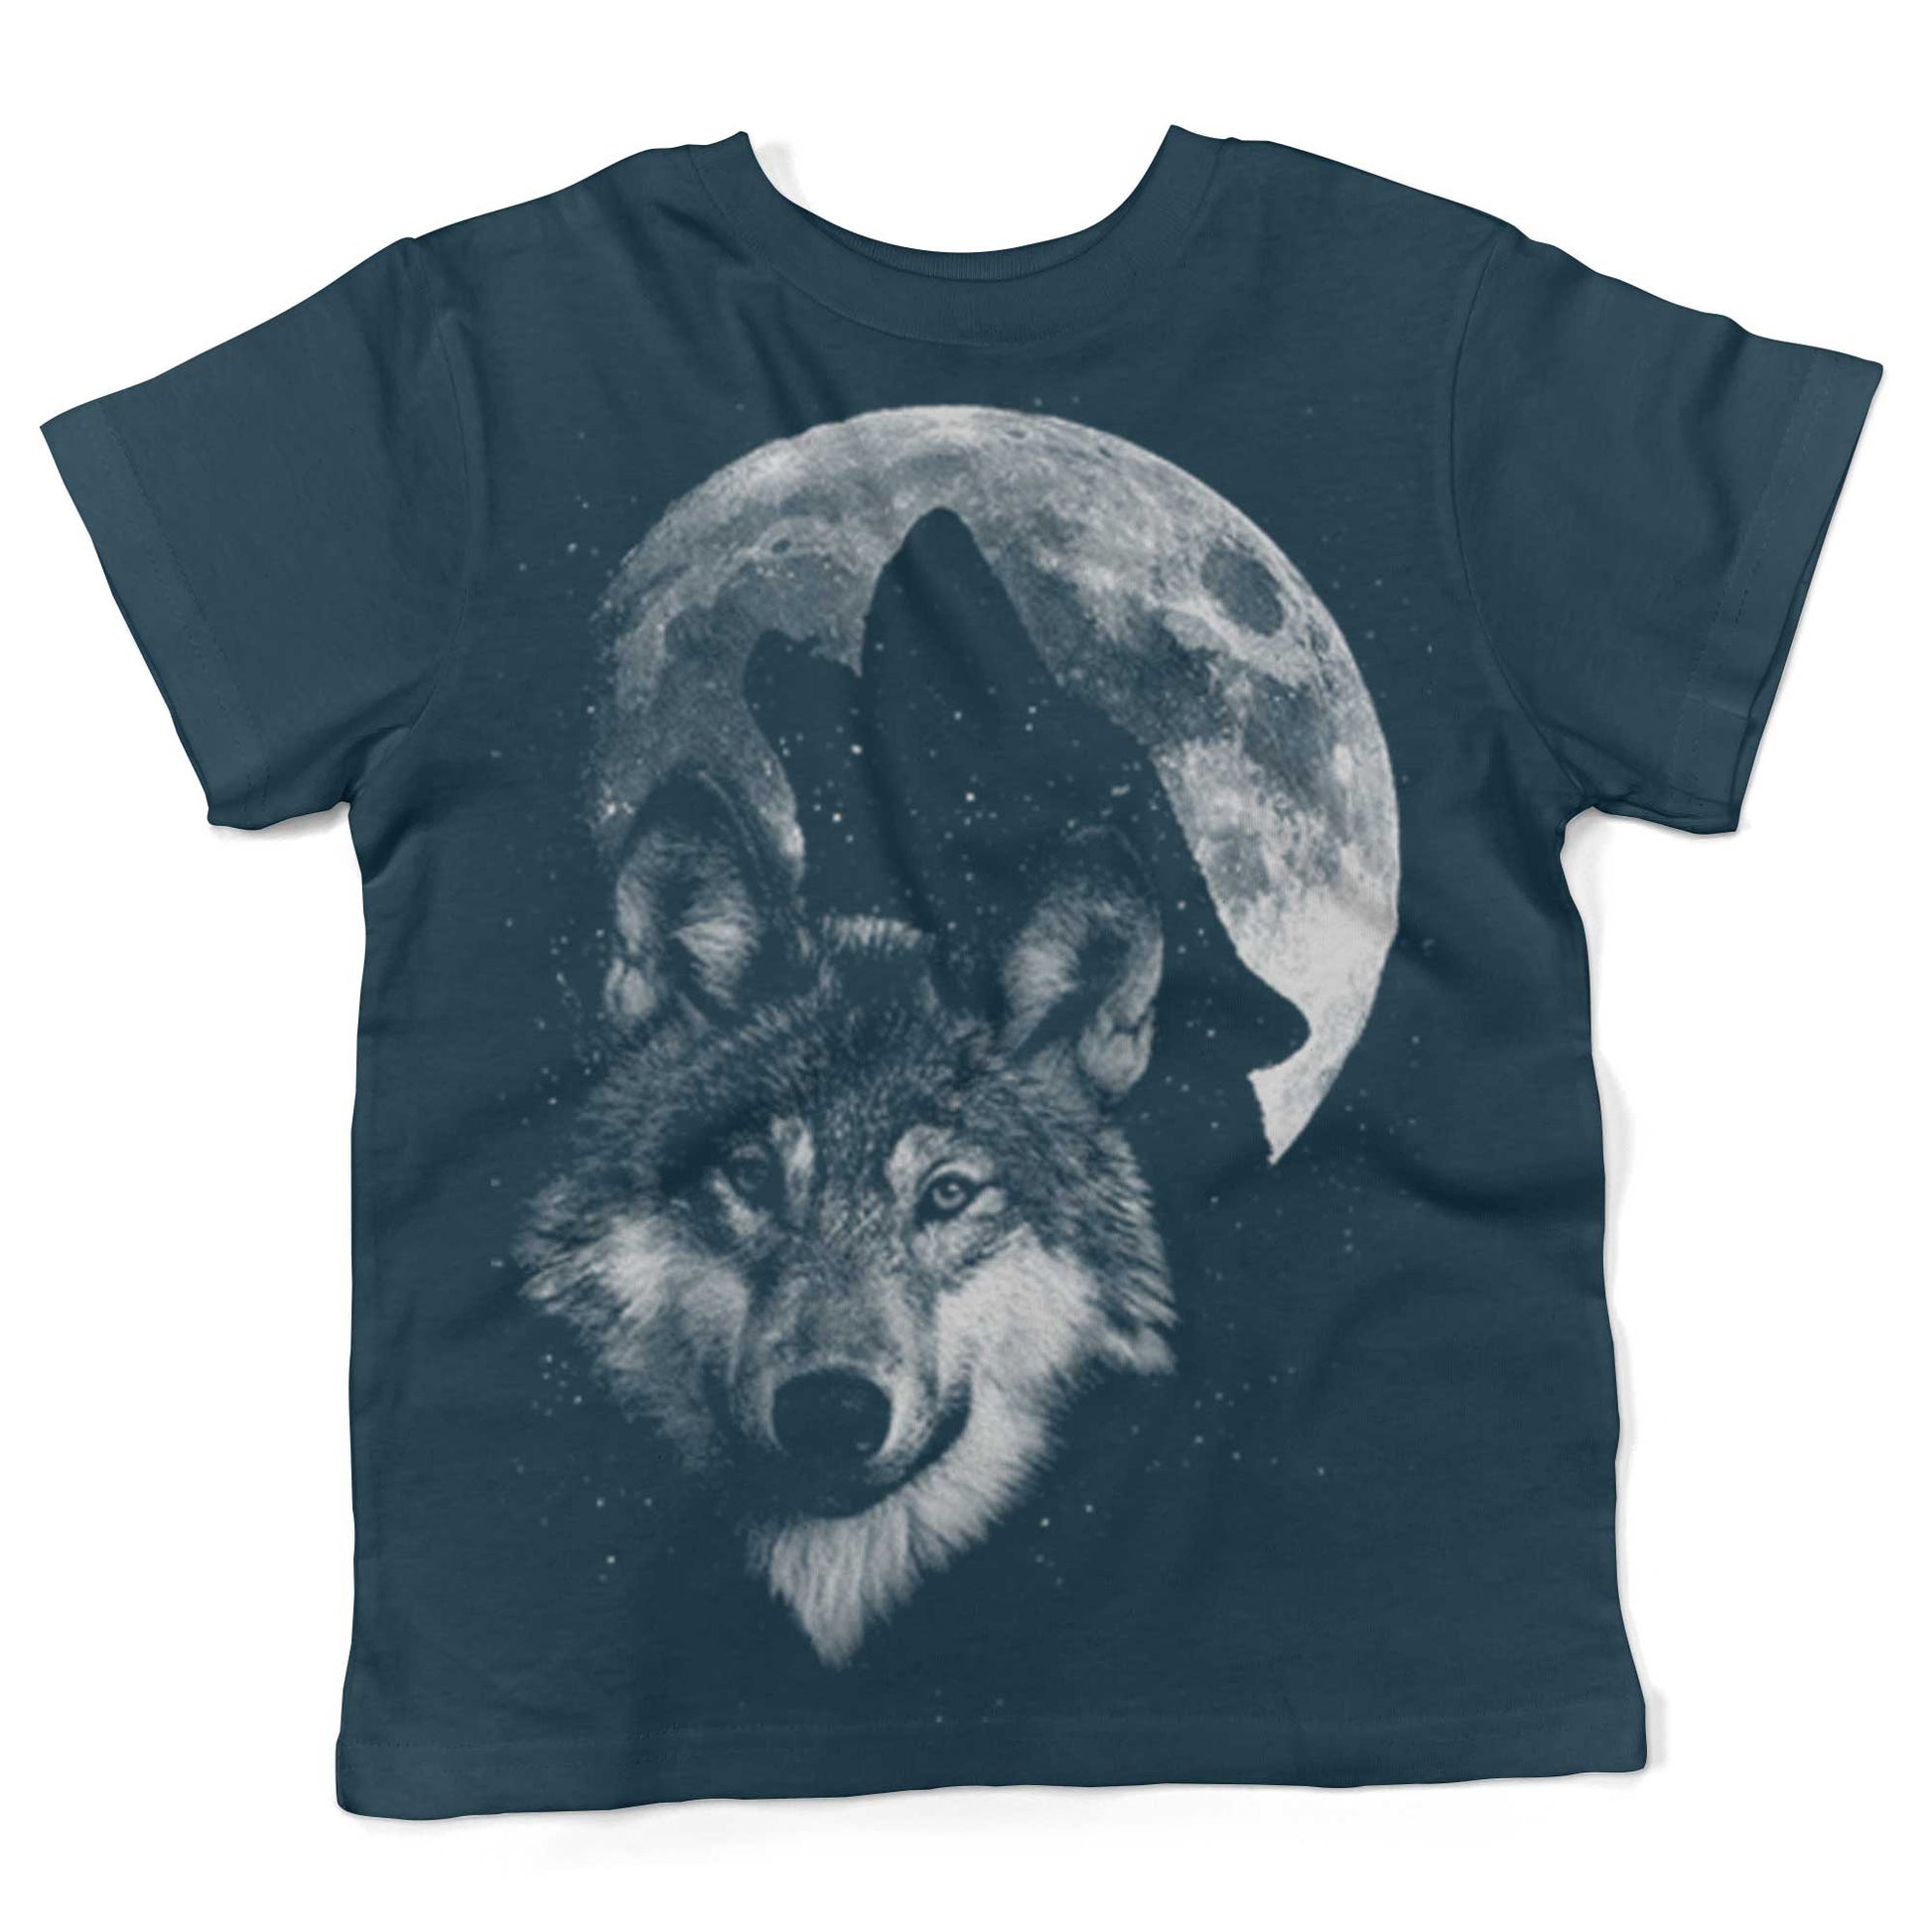 Glow In The Dark Howling Wolf, Full Moon Toddler Shirt-Organic Pacific Blue-2T